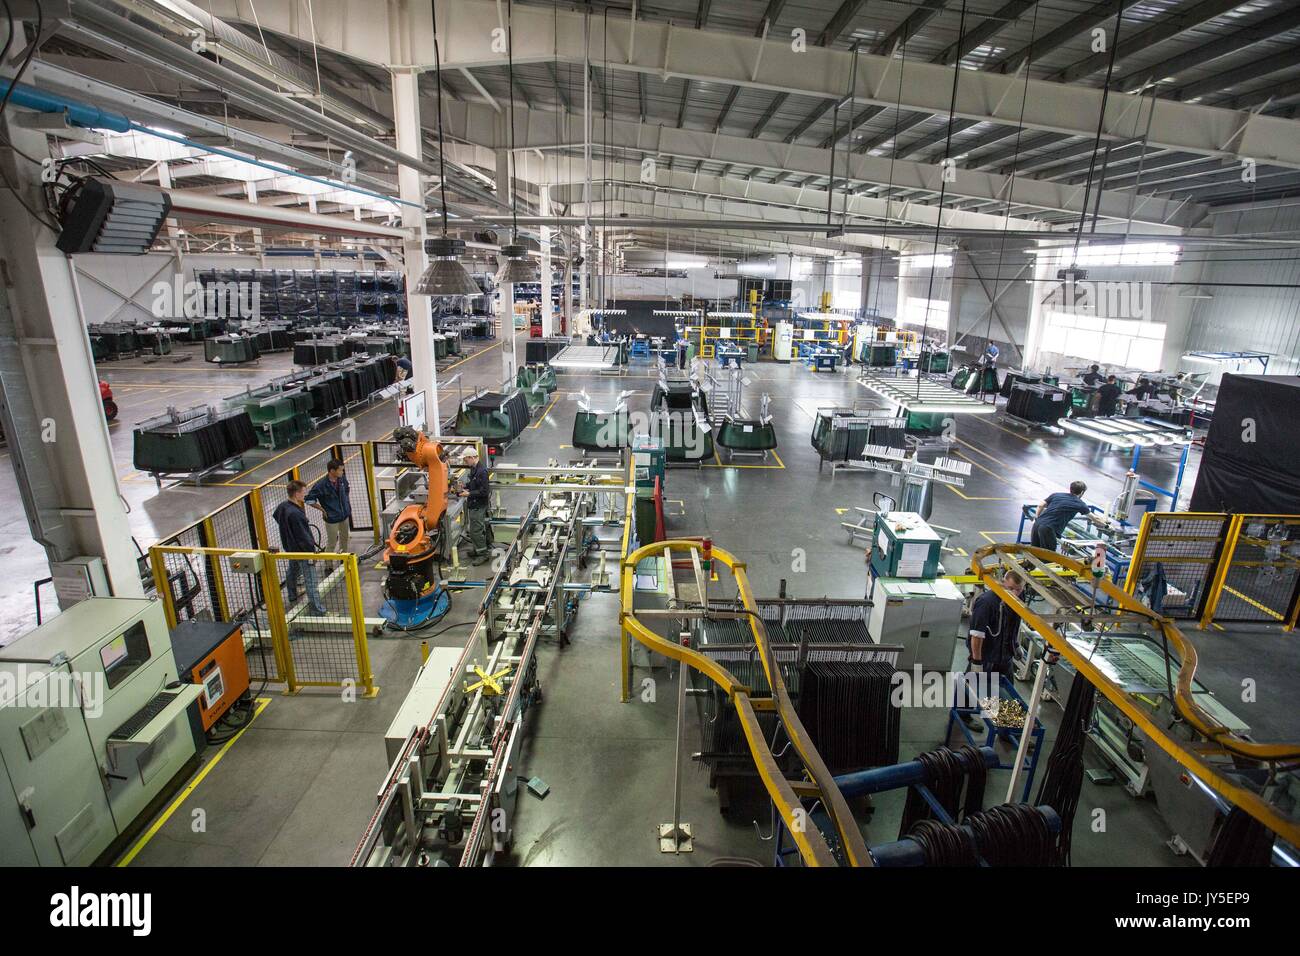 Kaluga. 18th July, 2017. Photo taken on July 18, 2017 shows the Russian factory of China's Fuyao Glass Industry Group Co. in Kaluga, Russia. Fuyao Group is a well-known Chinese enterprise that specializes in producing automobile safety glass and industrial technological glass. Fuyao invested in 2011 some 200 million U.S. dollars to build automobile-level float glass production lines in Kaluga. Credit: Wu Zhuang/Xinhua/Alamy Live News Stock Photo